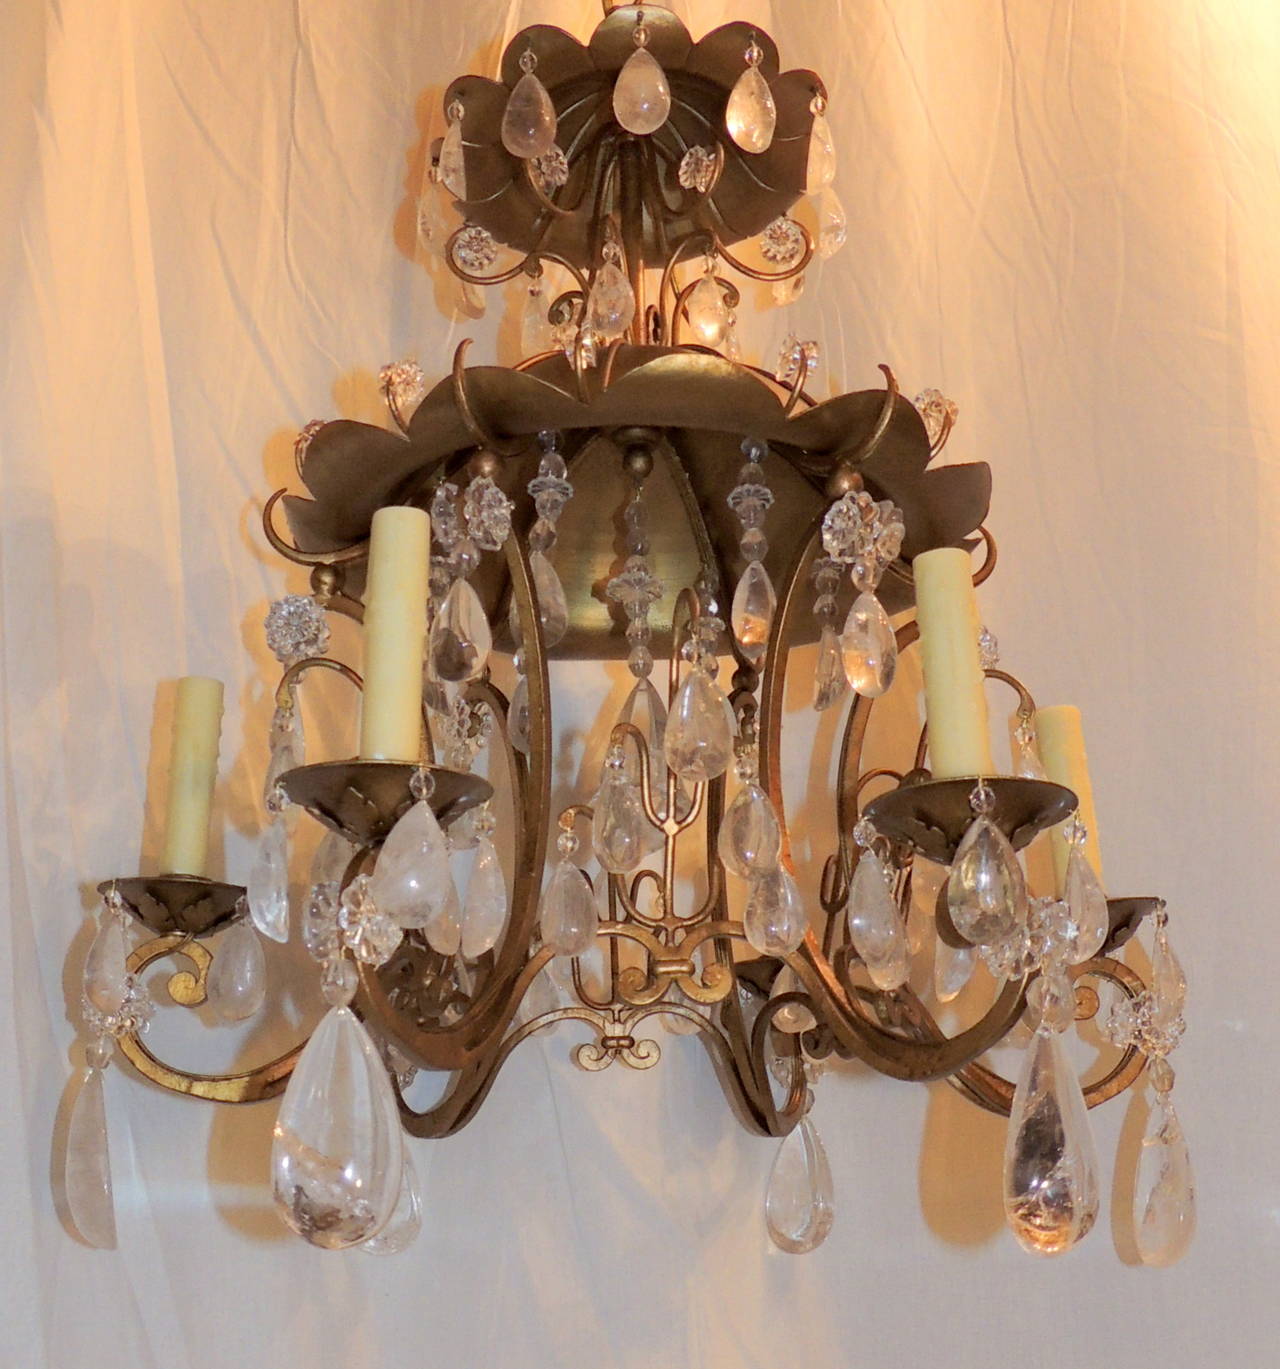 Wonderful Baguès gold gilt pagoda six-light chandelier dressed with rock crystal and crystal flowers. Finished in the centre with a fabulous rock crystal centrepiece.